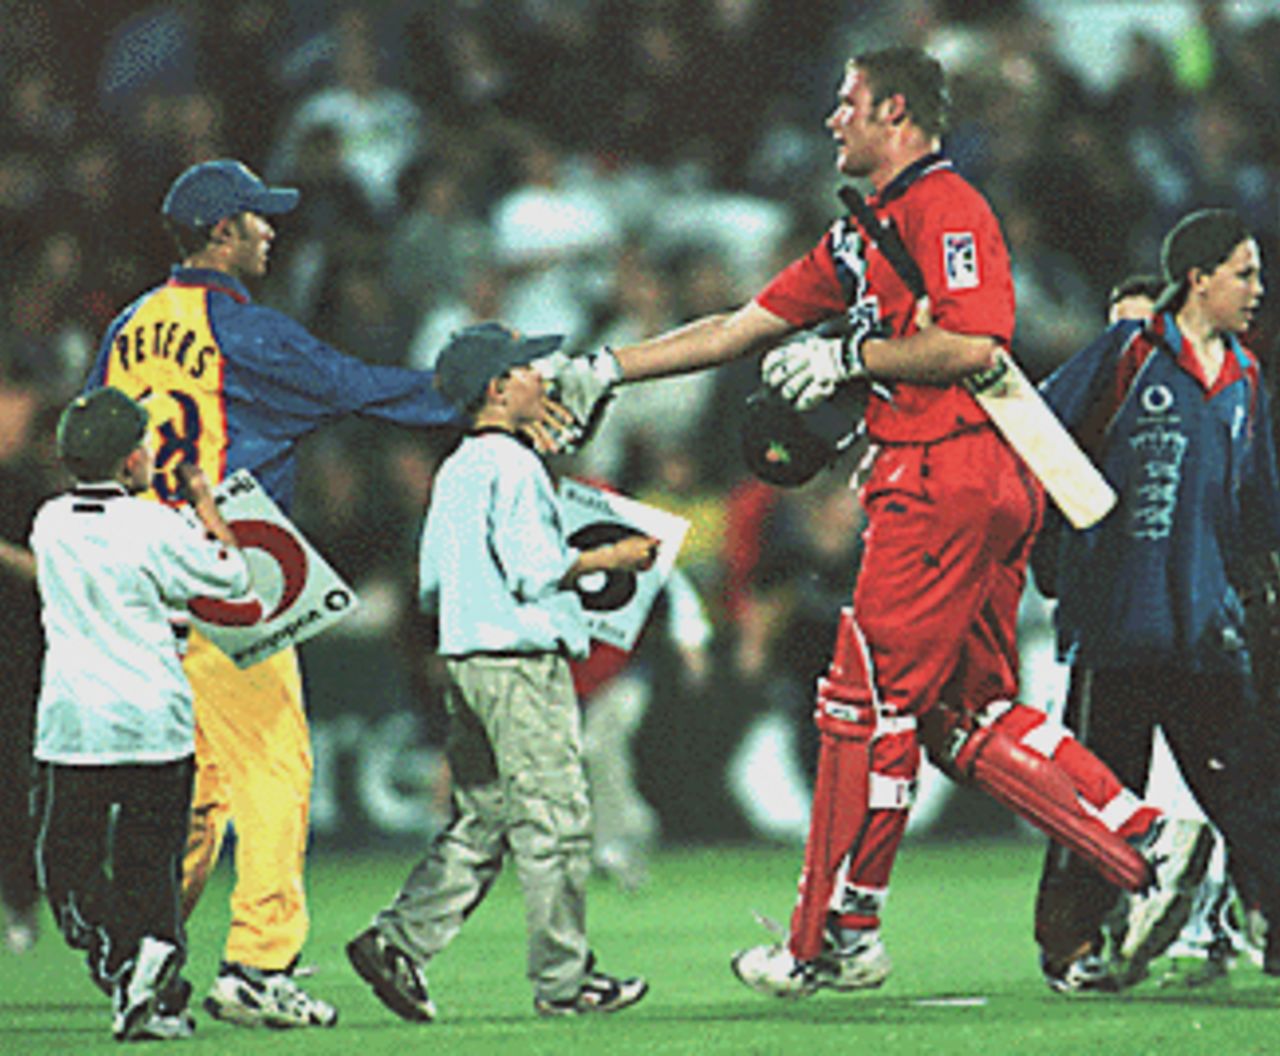 Andrew Flintoff hand shaking with Essex player after winning the match, Essex v Lancashire, National League 1st Division, 3 July 1999